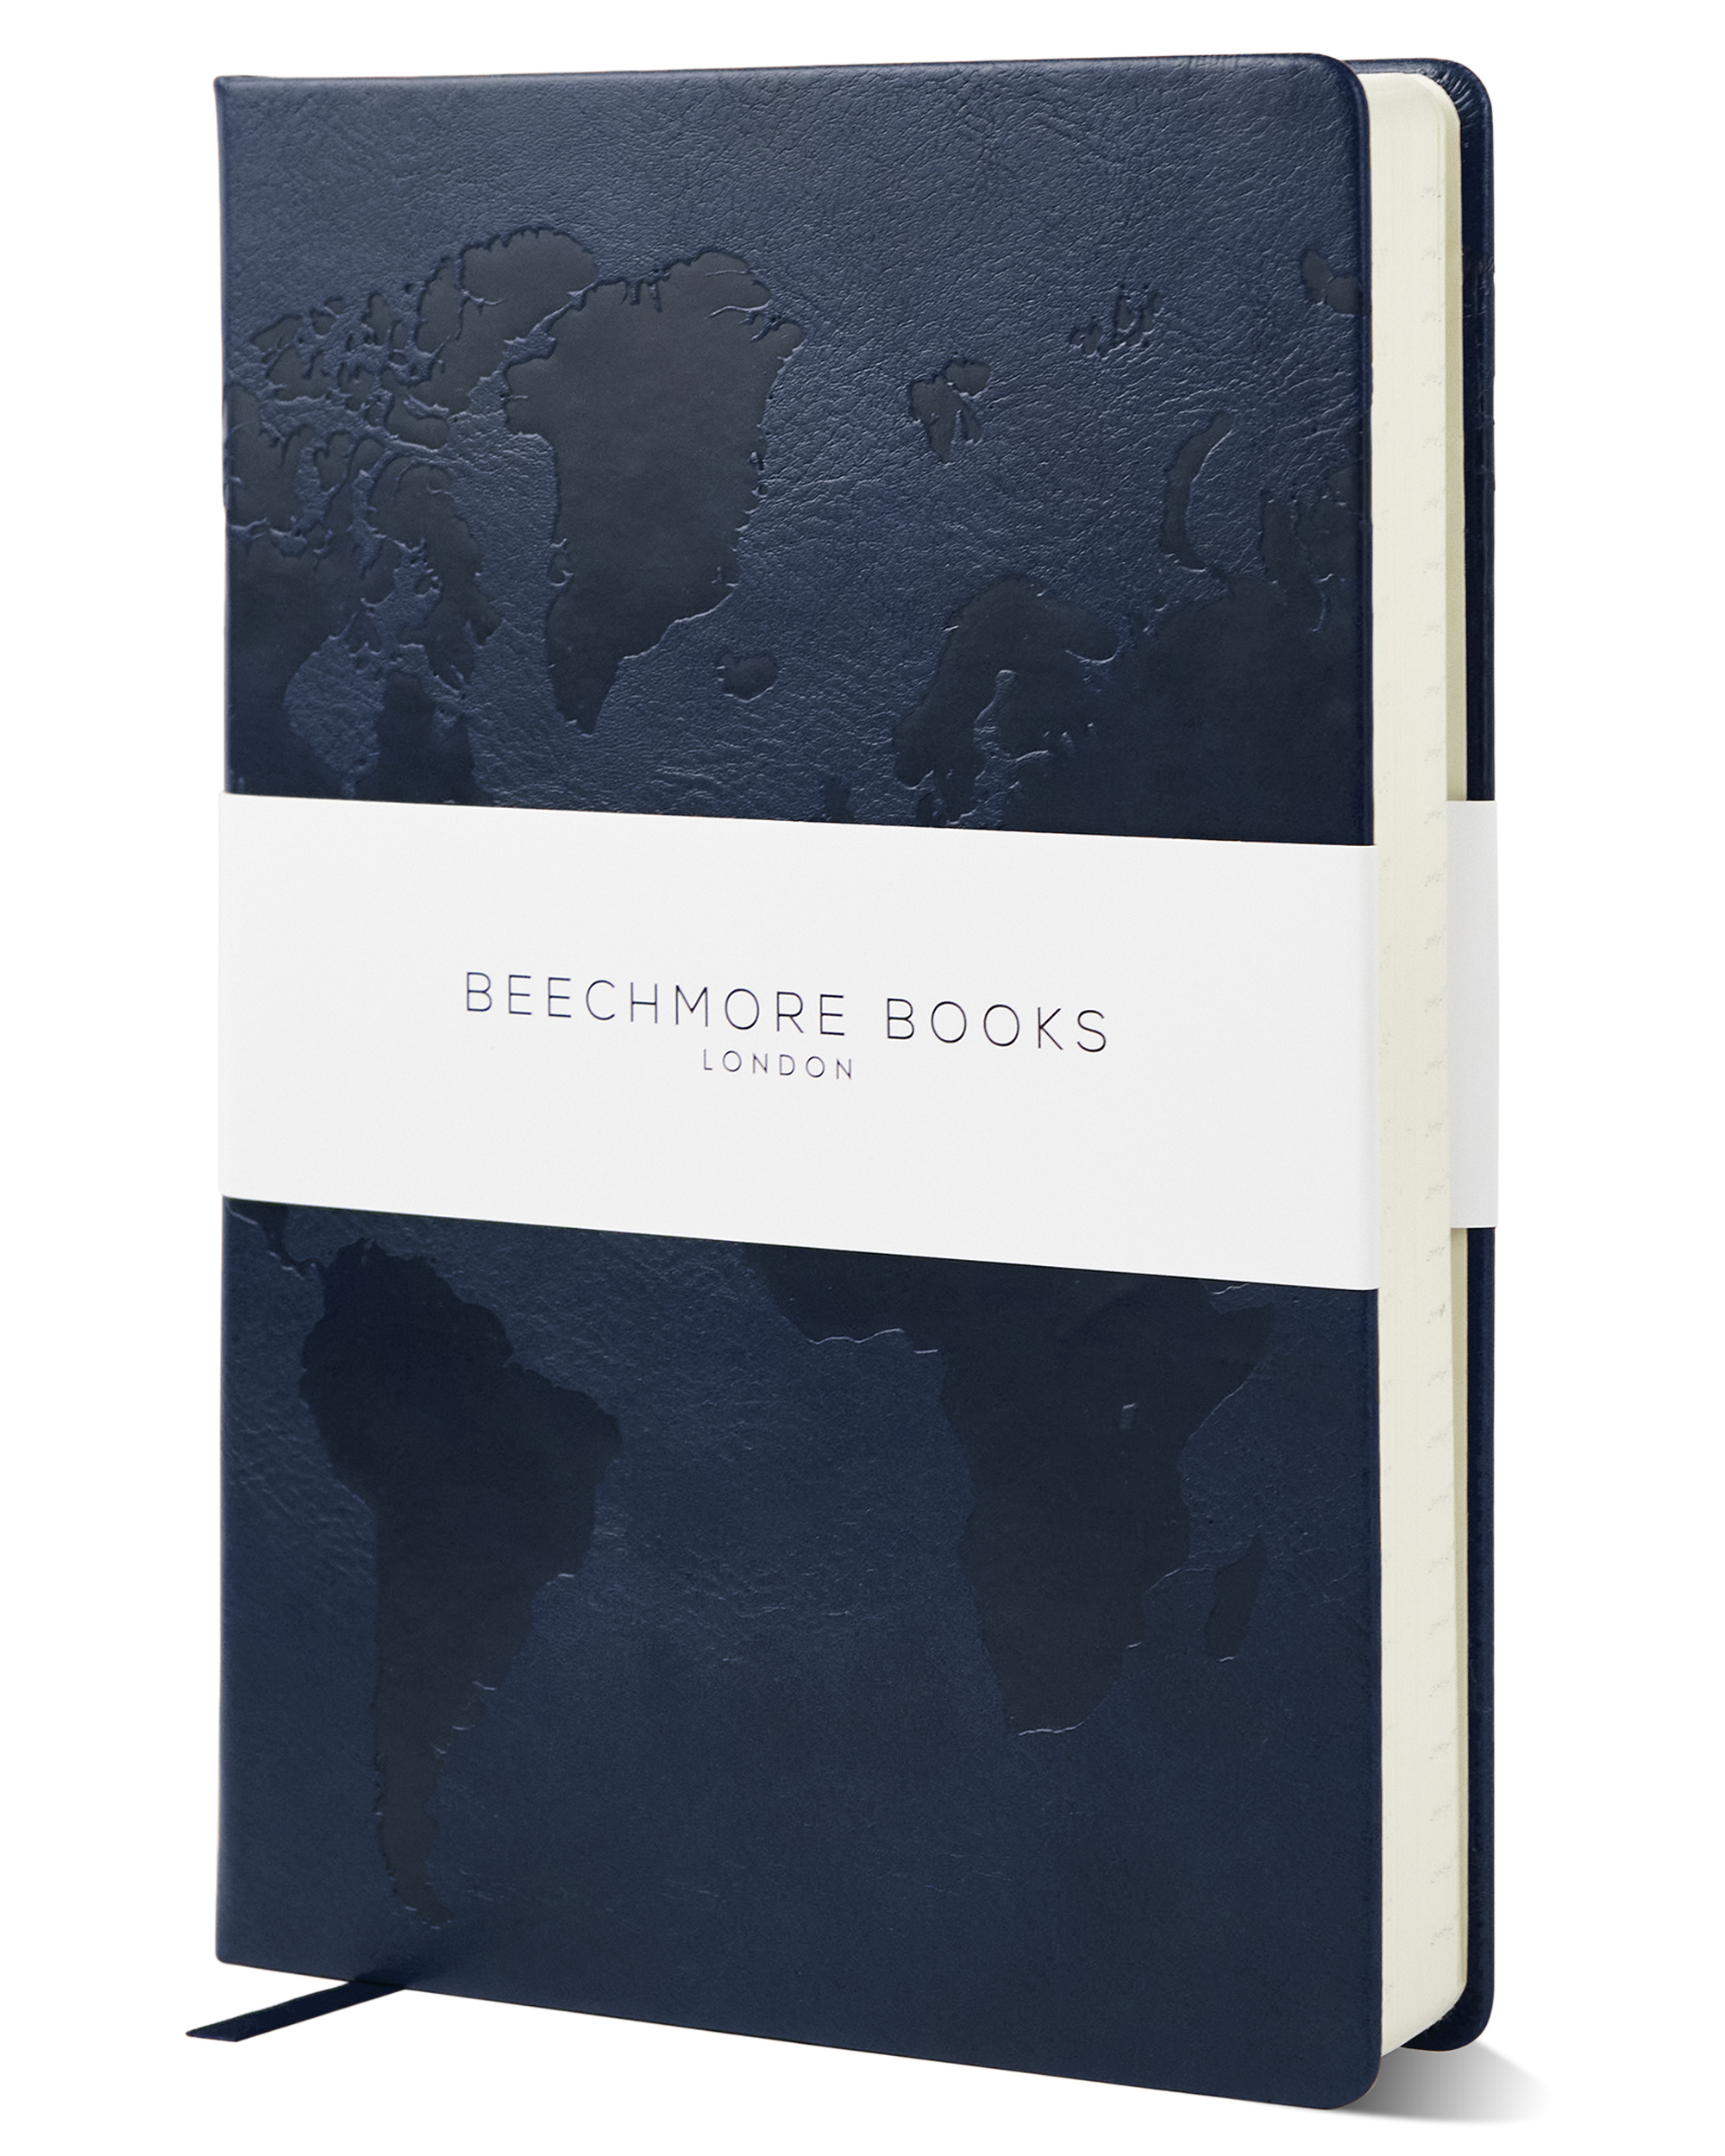 Symphony Blue A5 travel planner by Beechmore, echoing the tranquility of the world's waters in your plans.